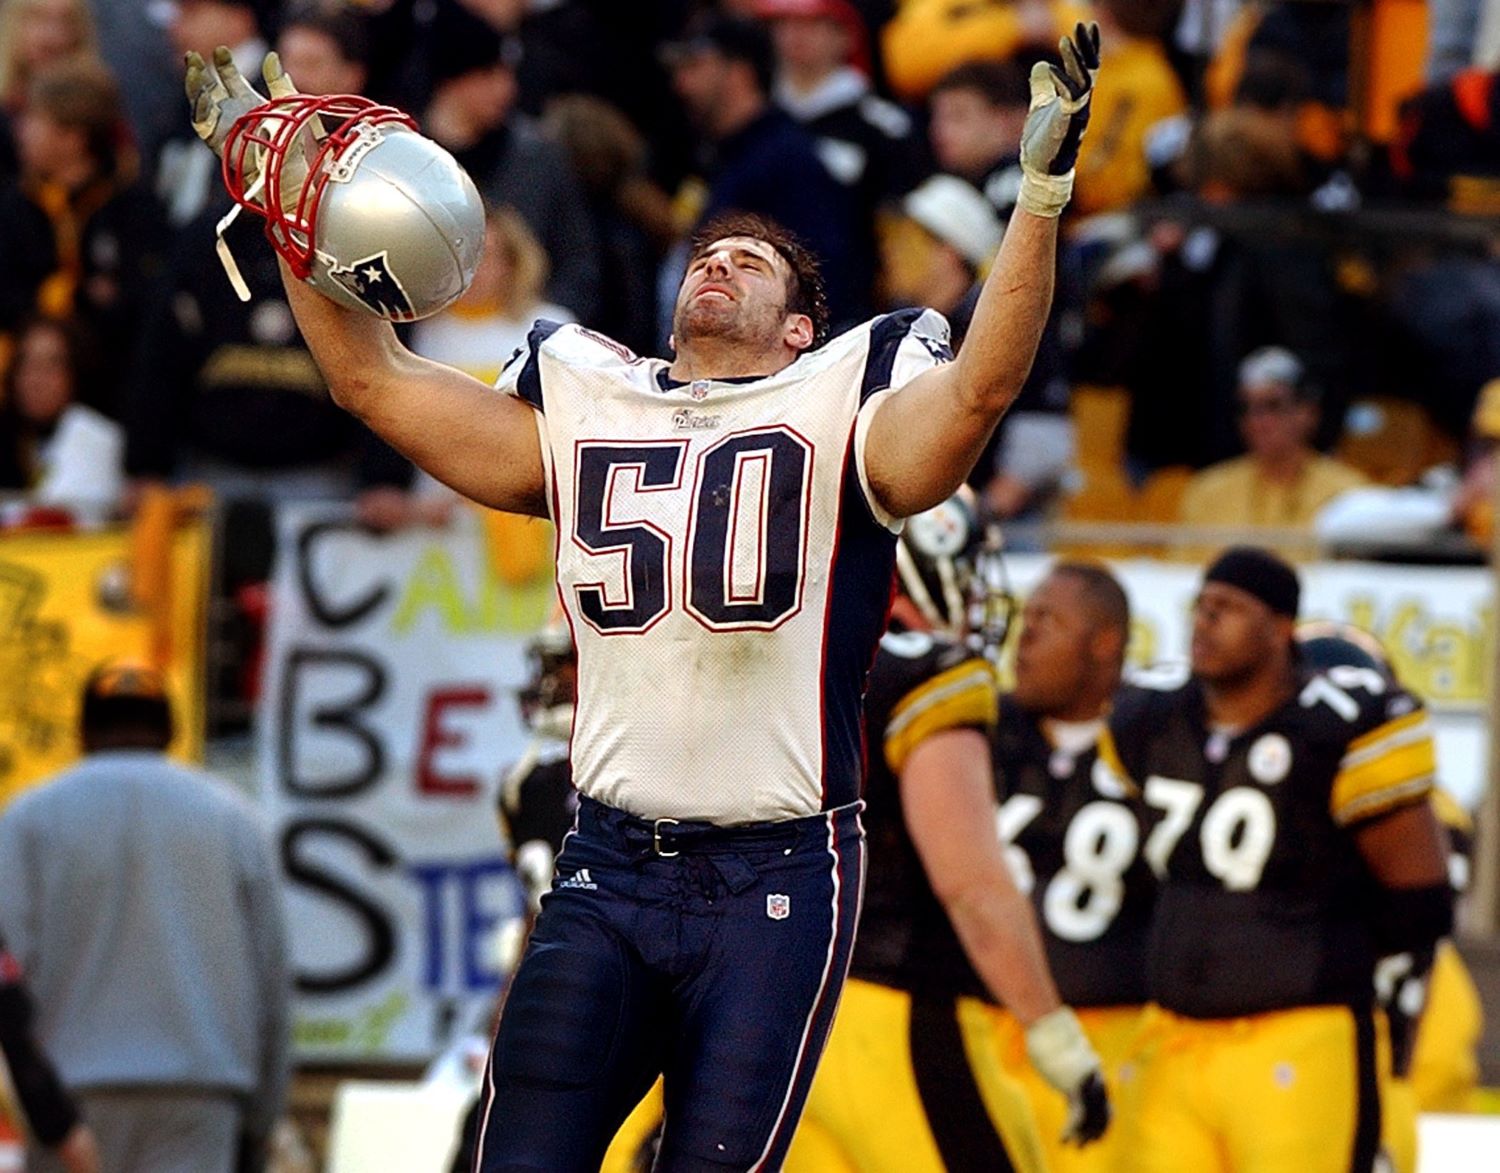 Before becoming the head coach of the Tennessee Titans, Mike Vrabel played for the New England Patriots as well as two other NFL teams.